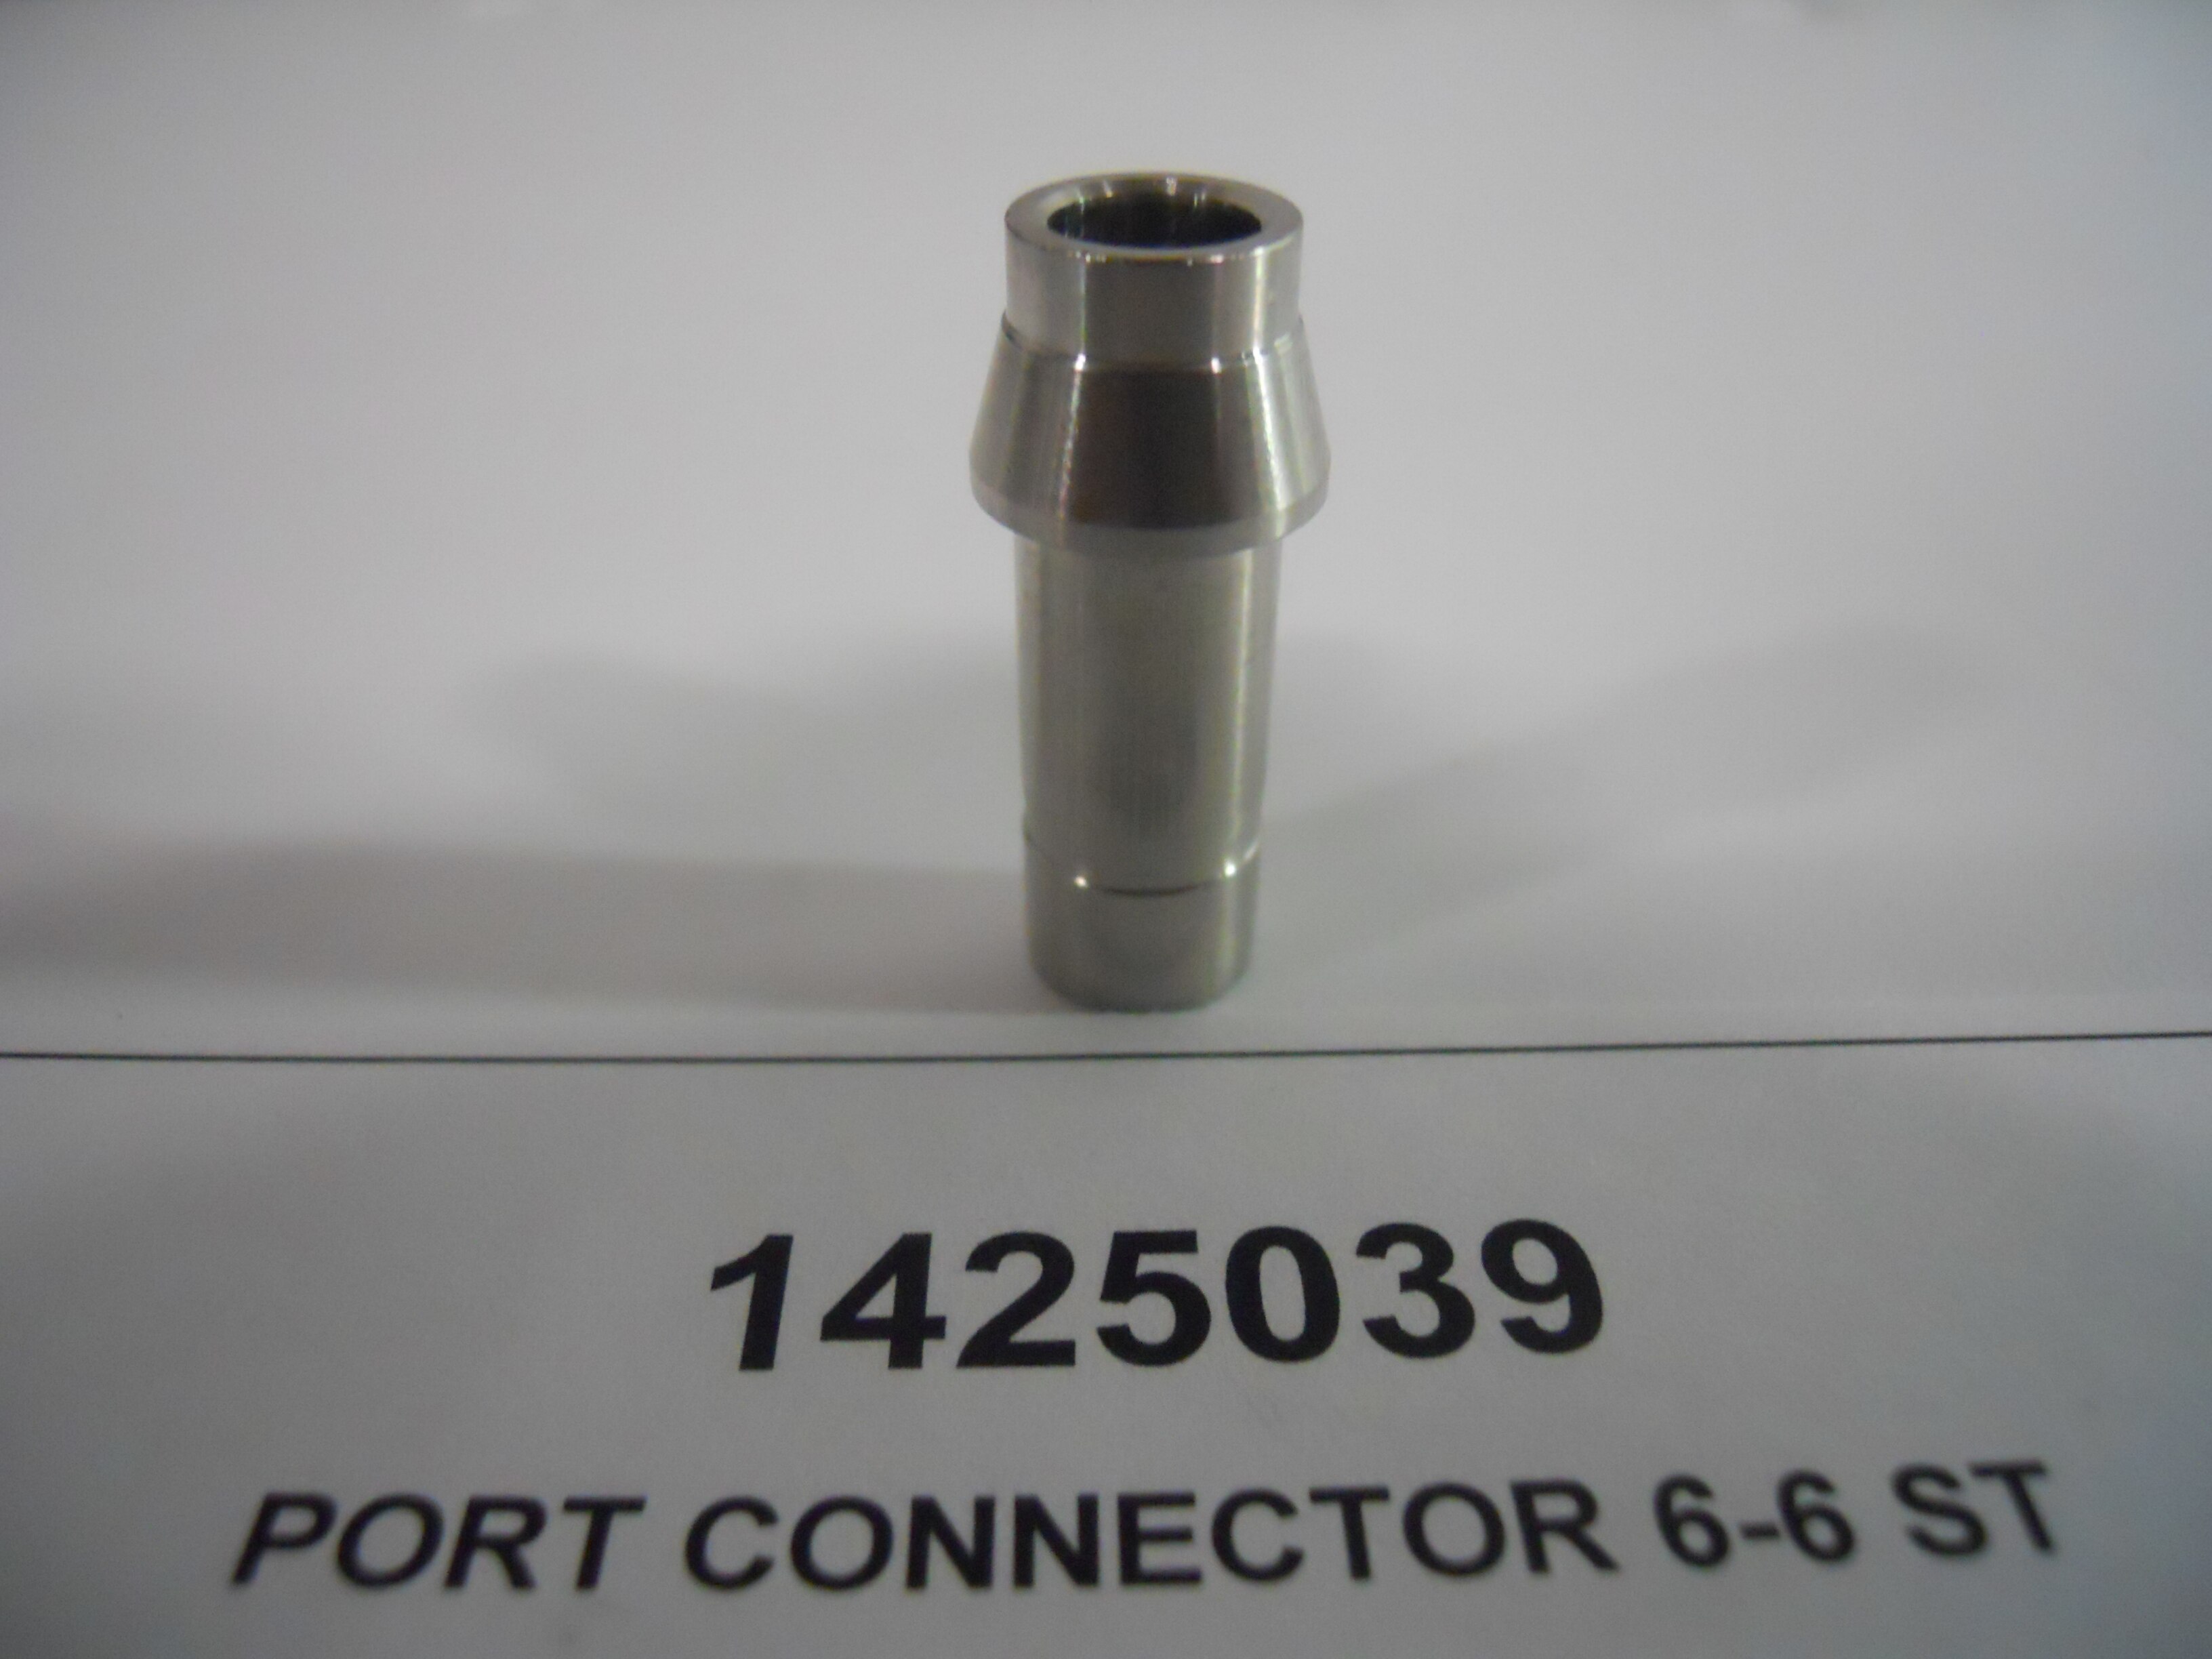 PORT CONNECTOR 6-6 ST